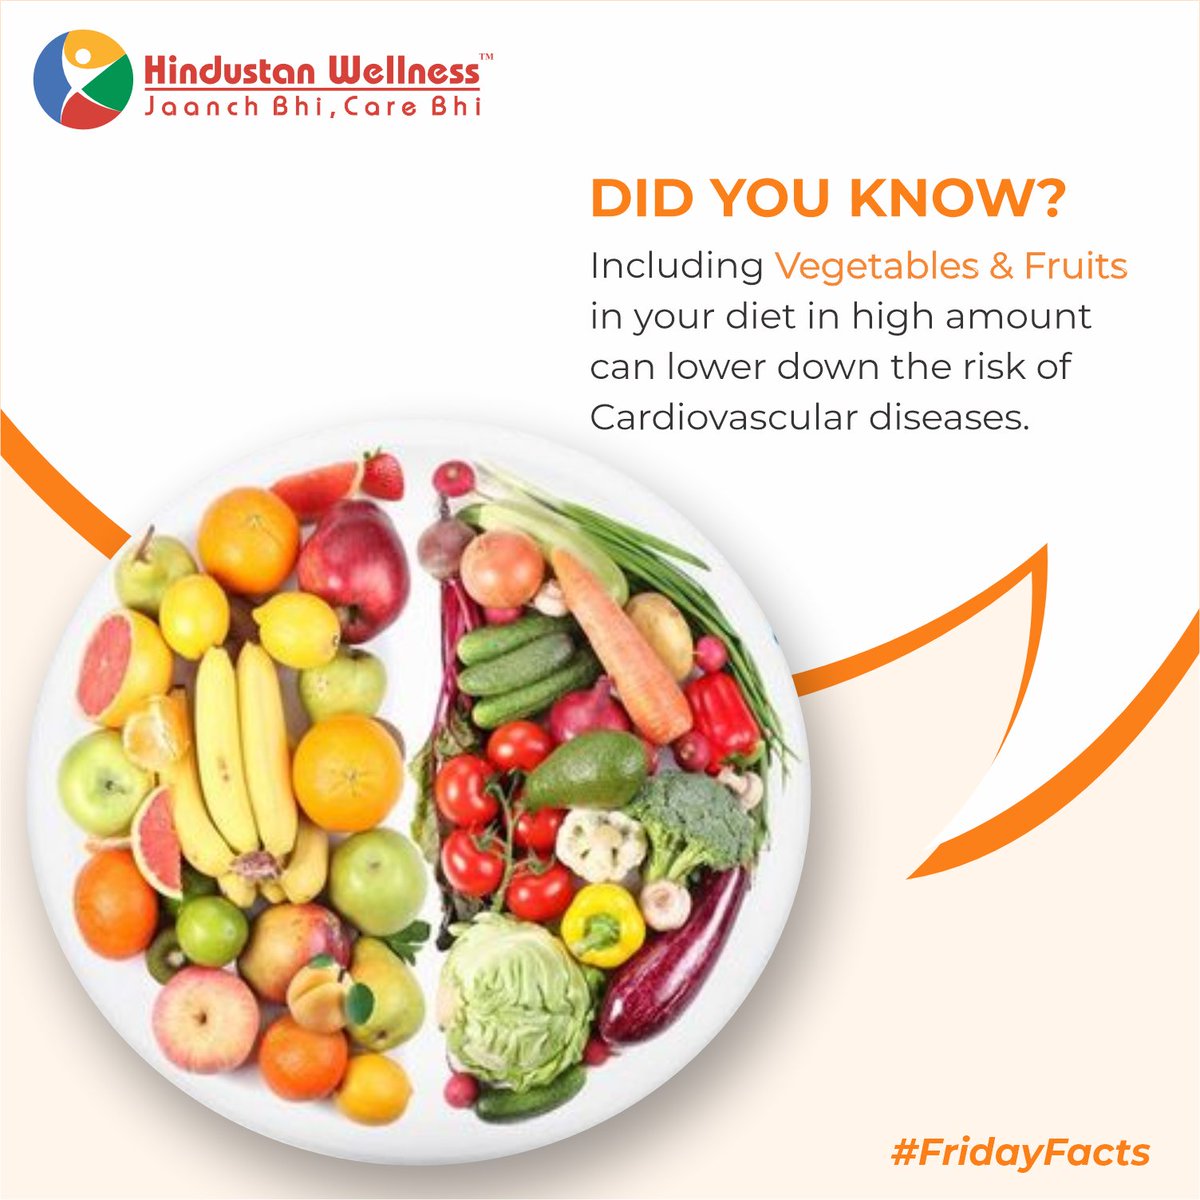 Did you know?

#didyouknow #vegetables #fruits #healthylifestyle #healthylife #healthcare #healthy #healthandwellness #healthiswealth #healthyliving #jaanchbhicarebhi #HindustanWellness